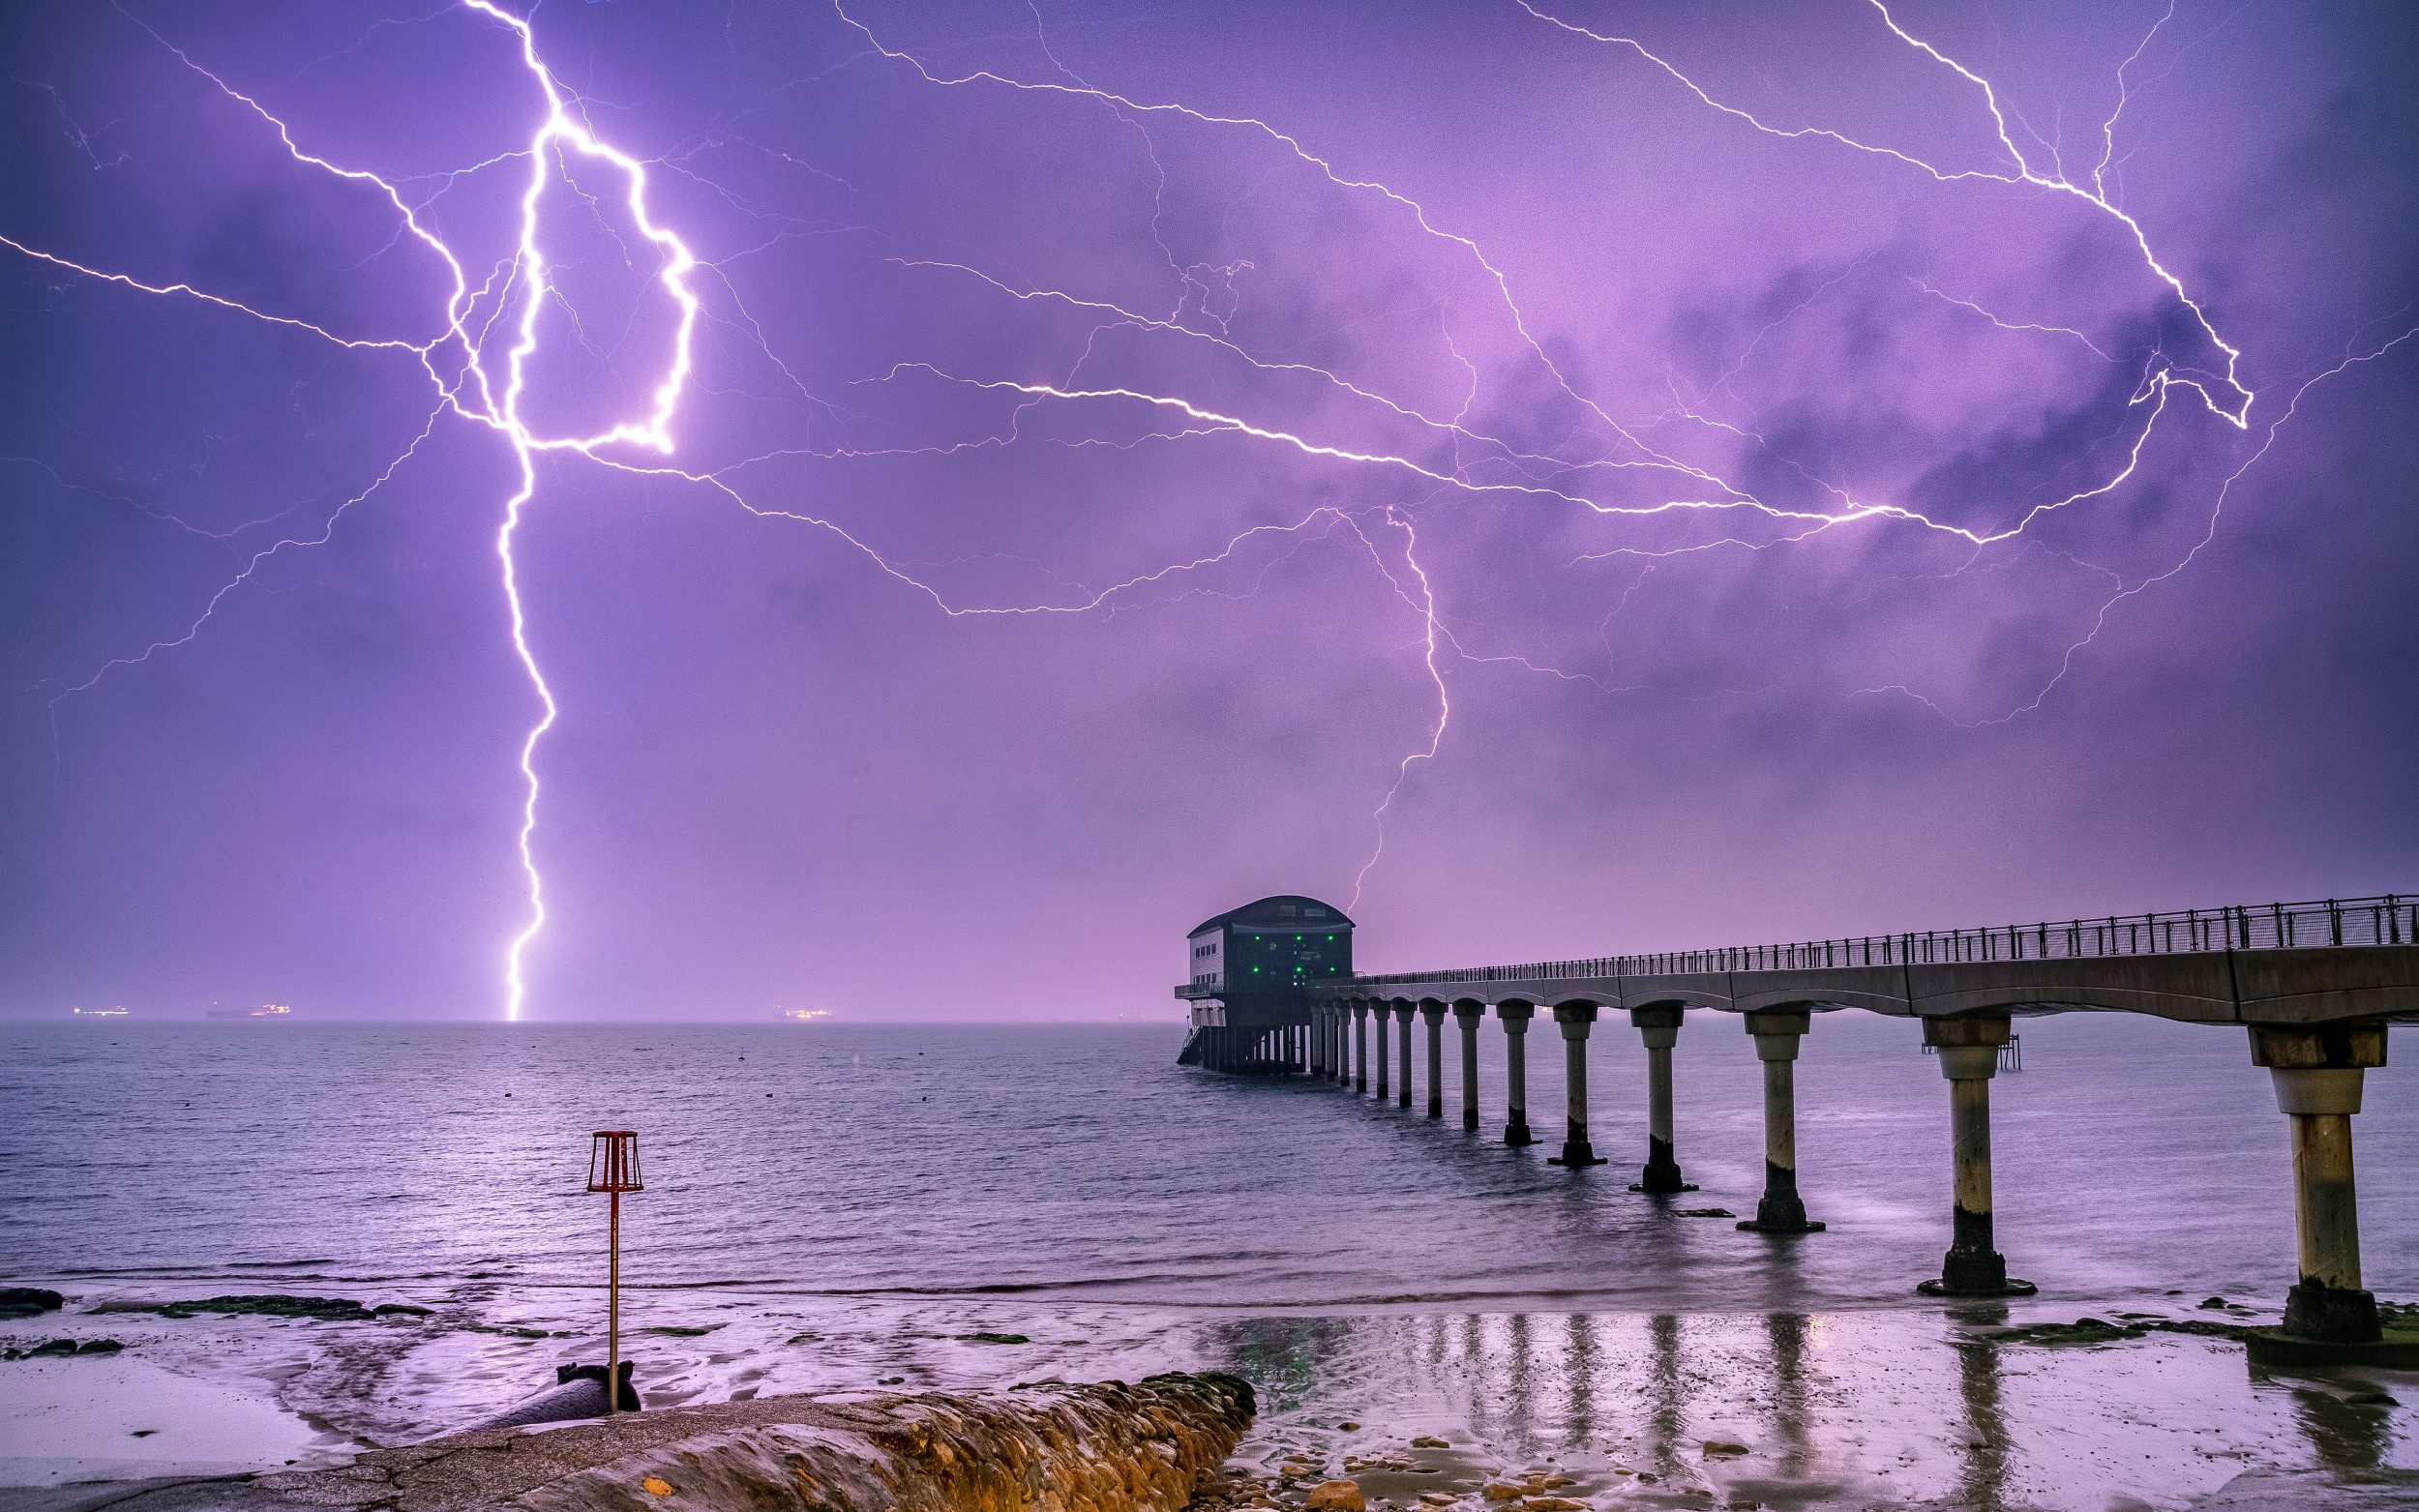 Trains delayed after spectacular lightning storms cut power